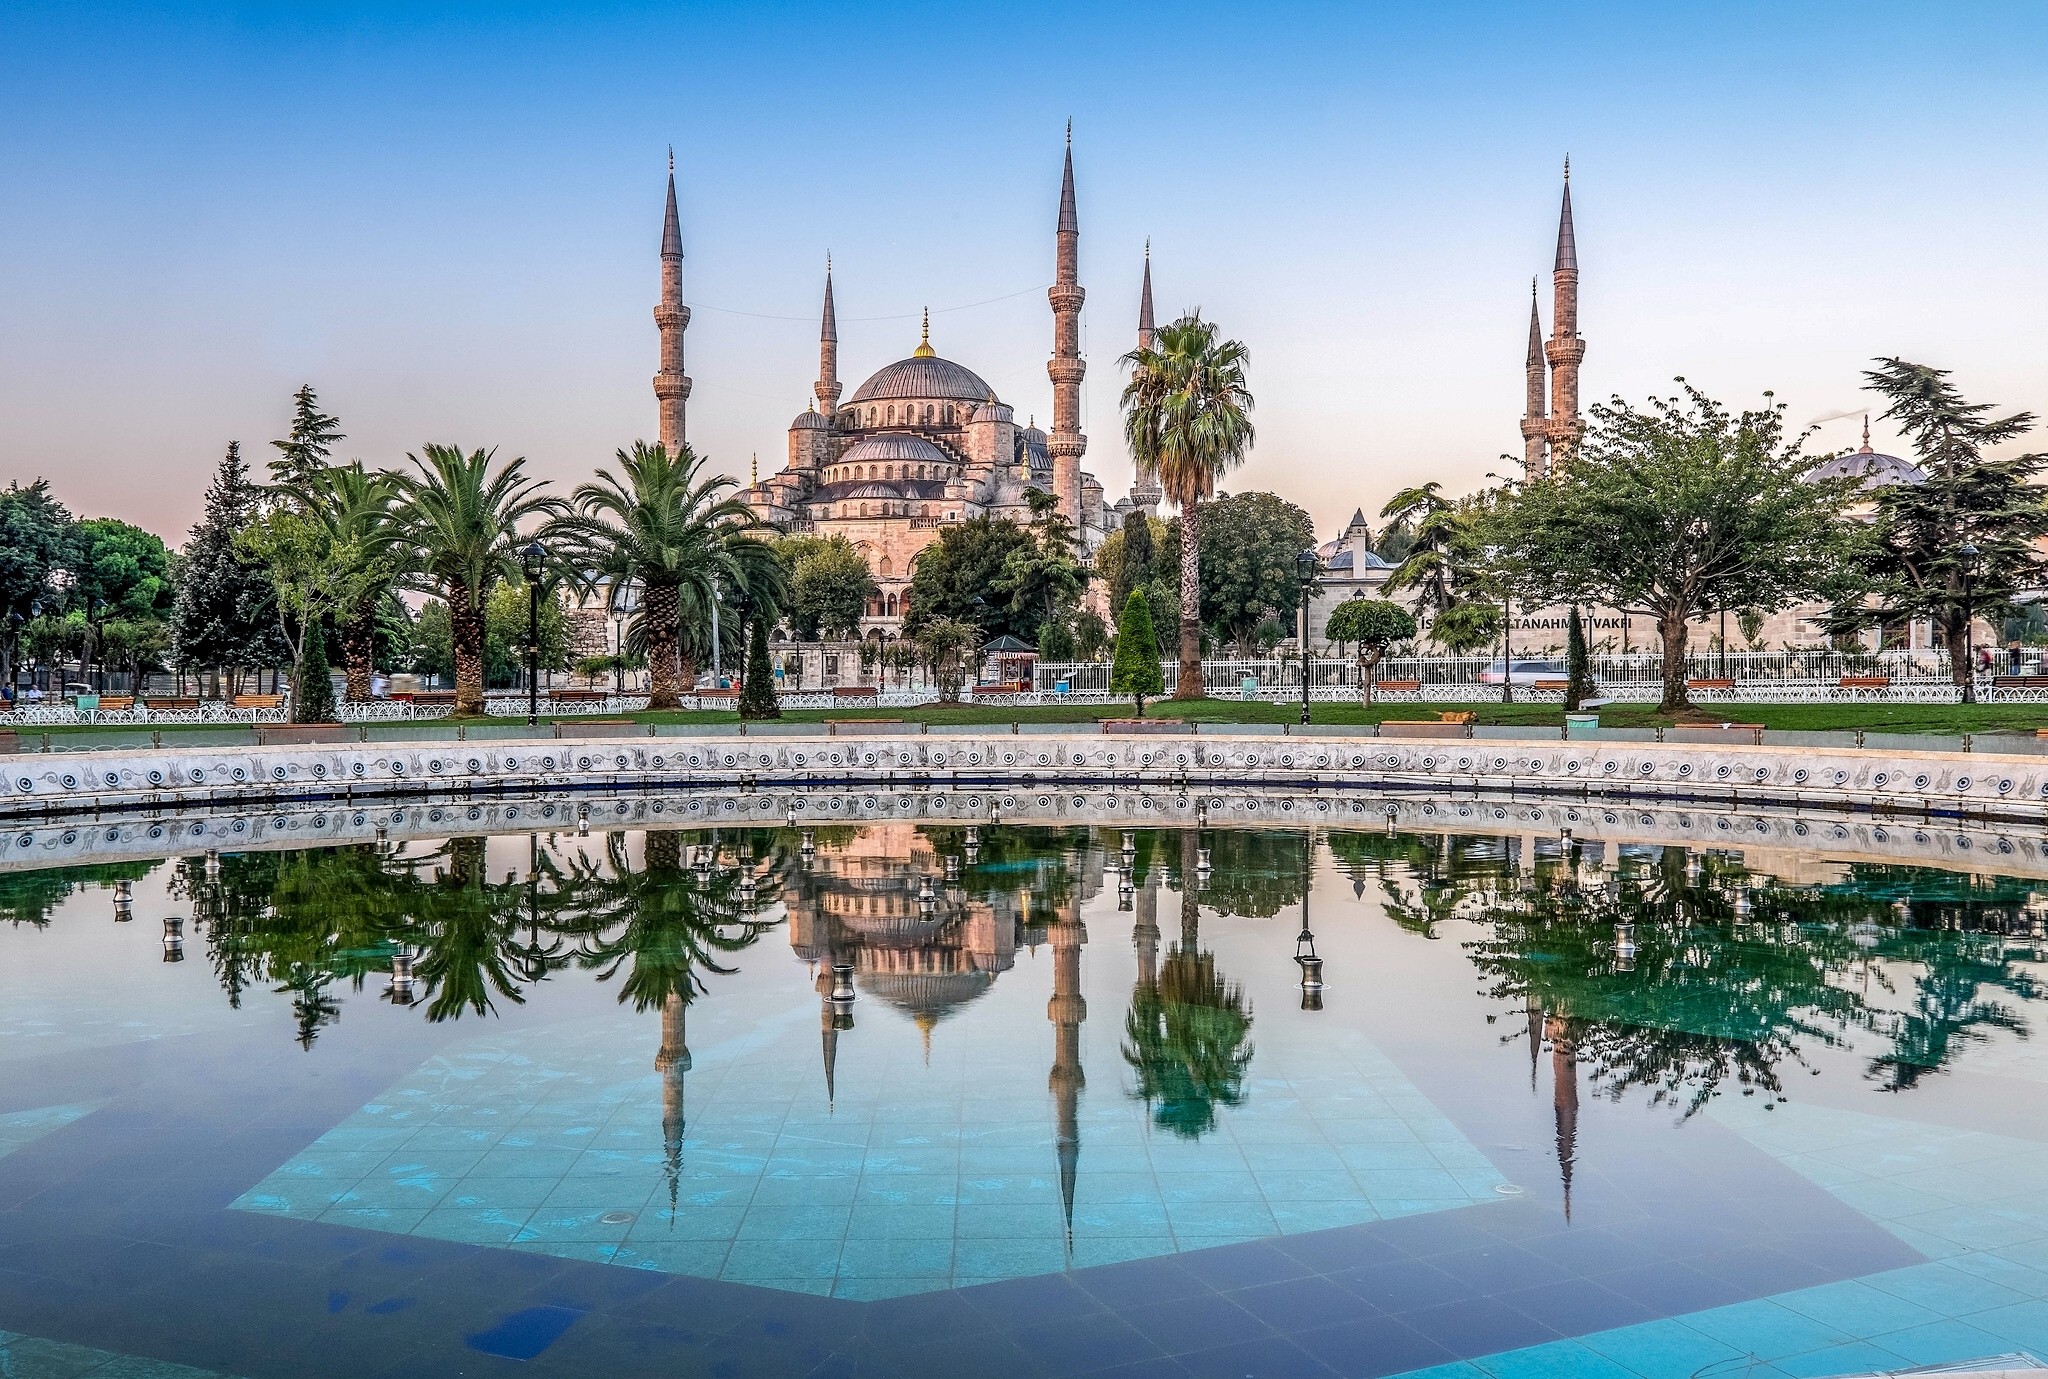 Architecture Cityscape Istanbul Turkey Sultan Ahmed Mosque Palm Trees Water Tiles Reflection Park 2048x1379